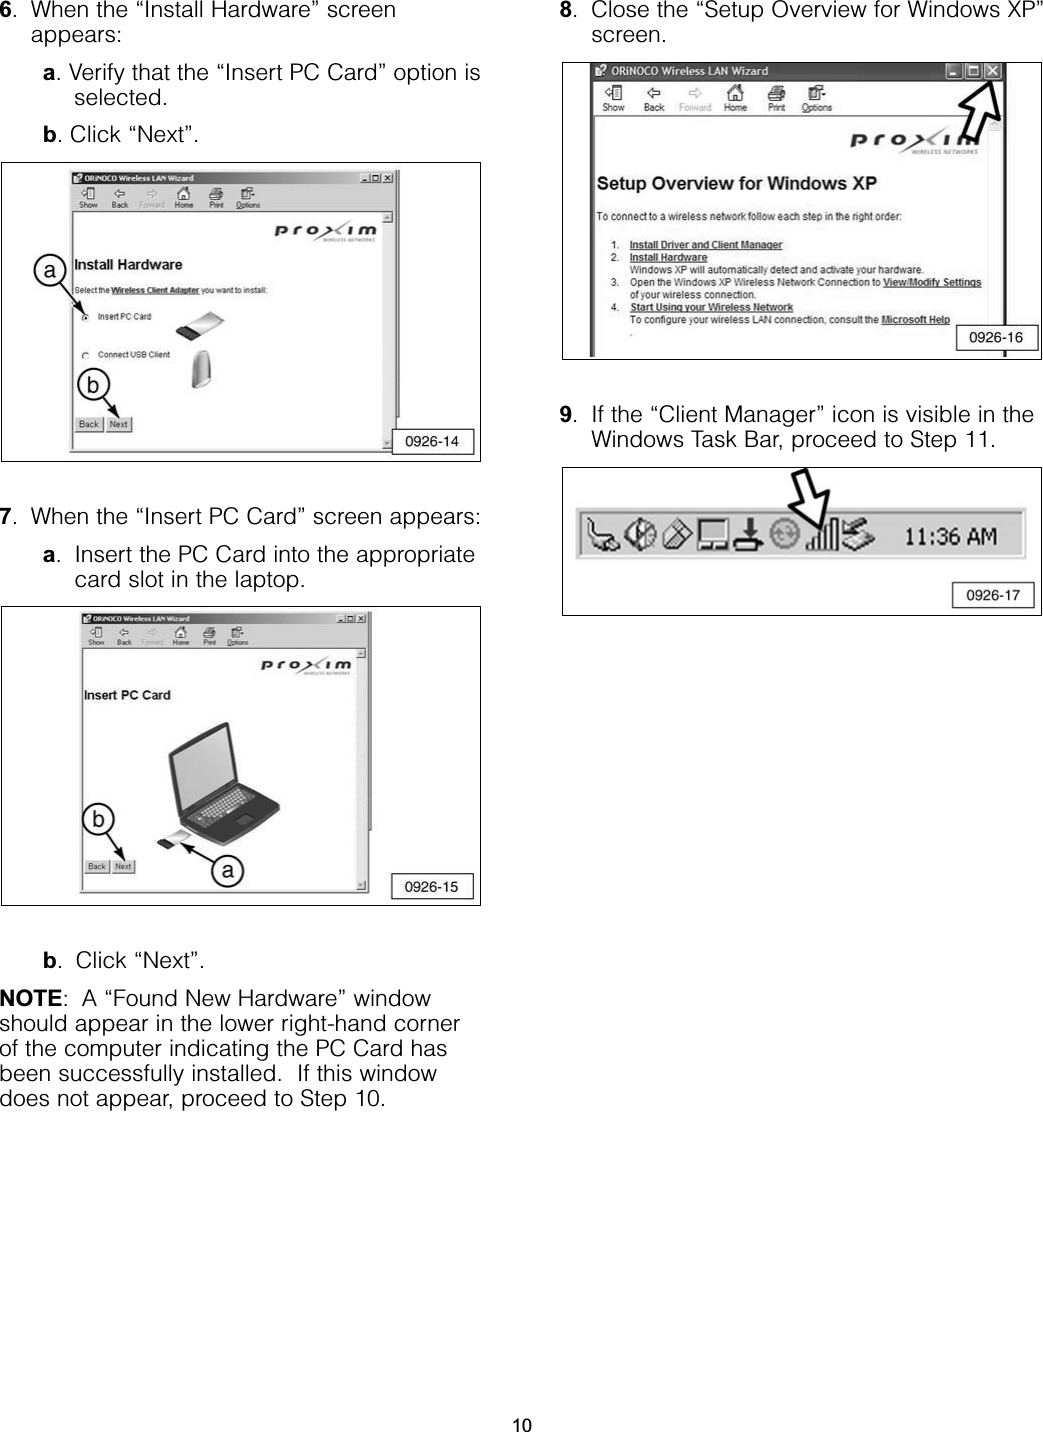 6. When the “Install Hardware” screenappears:a. Verify that the “Insert PC Card” option isselected.b. Click “Next”.7. When the “Insert PC Card” screen appears:a. Insert the PC Card into the appropriatecard slot in the laptop.b. Click “Next”.NOTE: A “Found New Hardware” windowshould appear in the lower right-hand cornerof the computer indicating the PC Card hasbeen successfully installed.  If this windowdoes not appear, proceed to Step 10.8. Close the “Setup Overview for Windows XP”screen.9. If the “Client Manager” icon is visible in theWindows Task Bar, proceed to Step 11.10